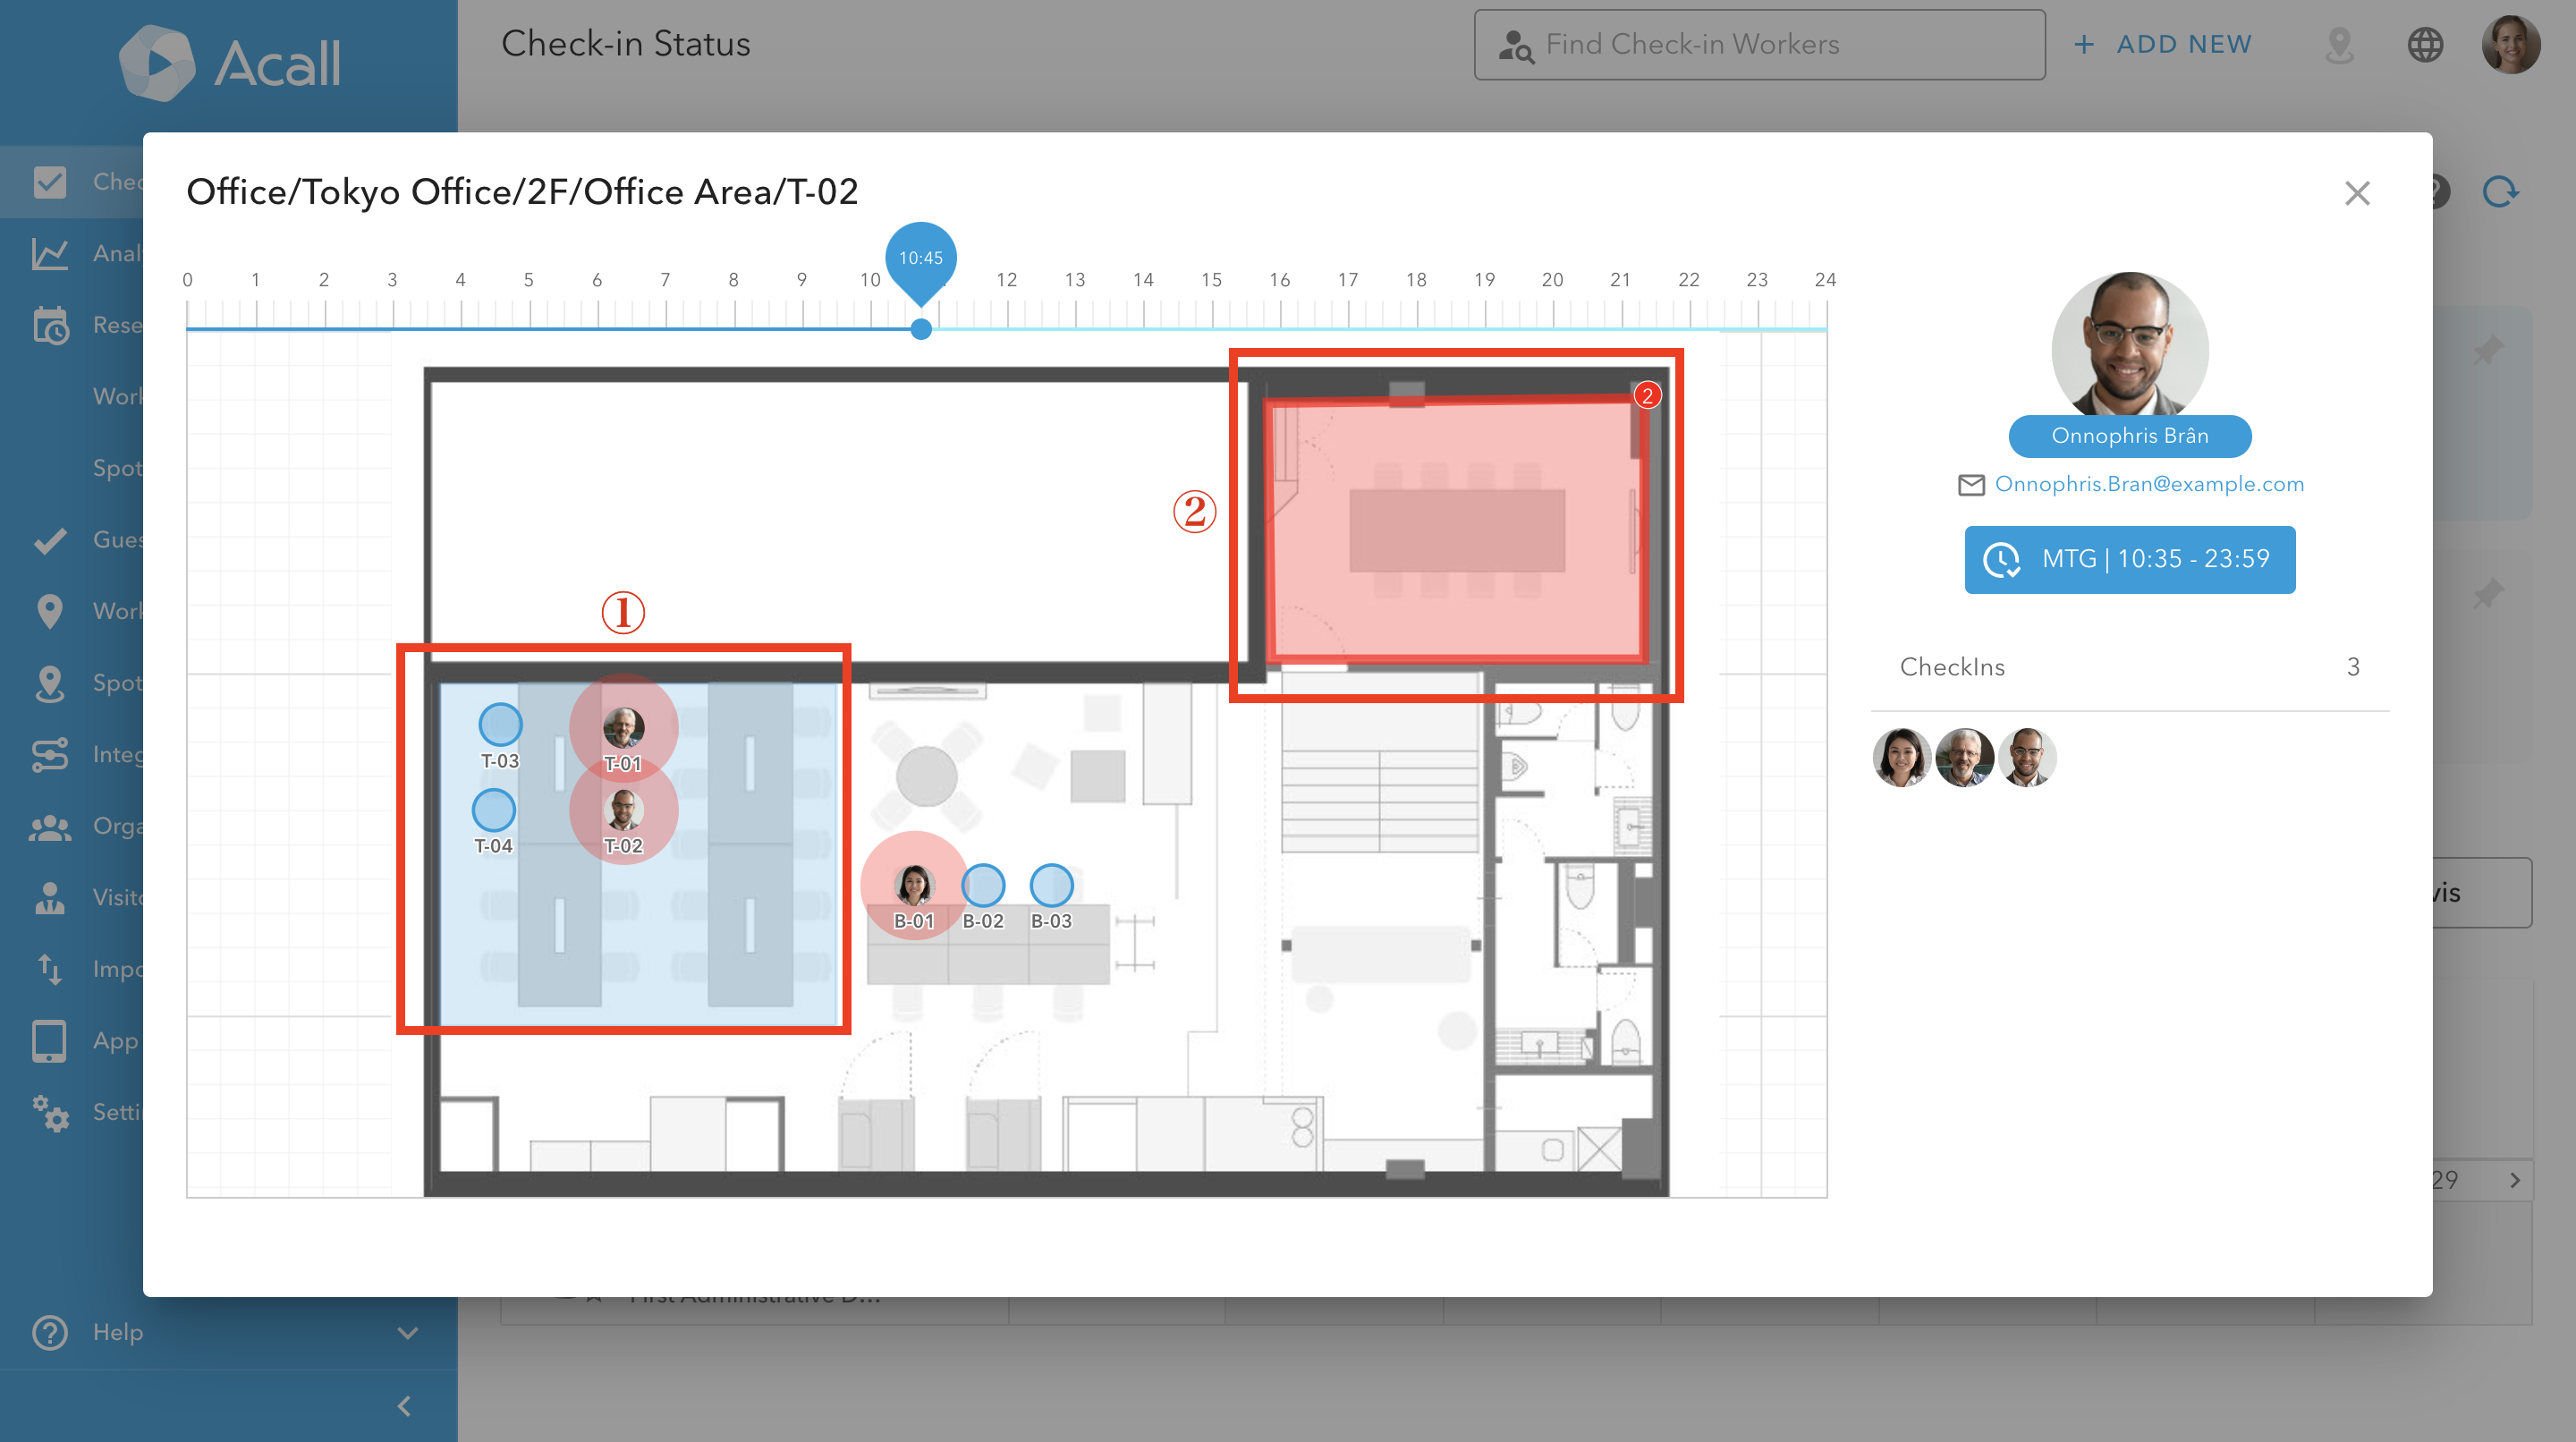 Search for check-in worker  - Differences in display depending on permission for spots5.png